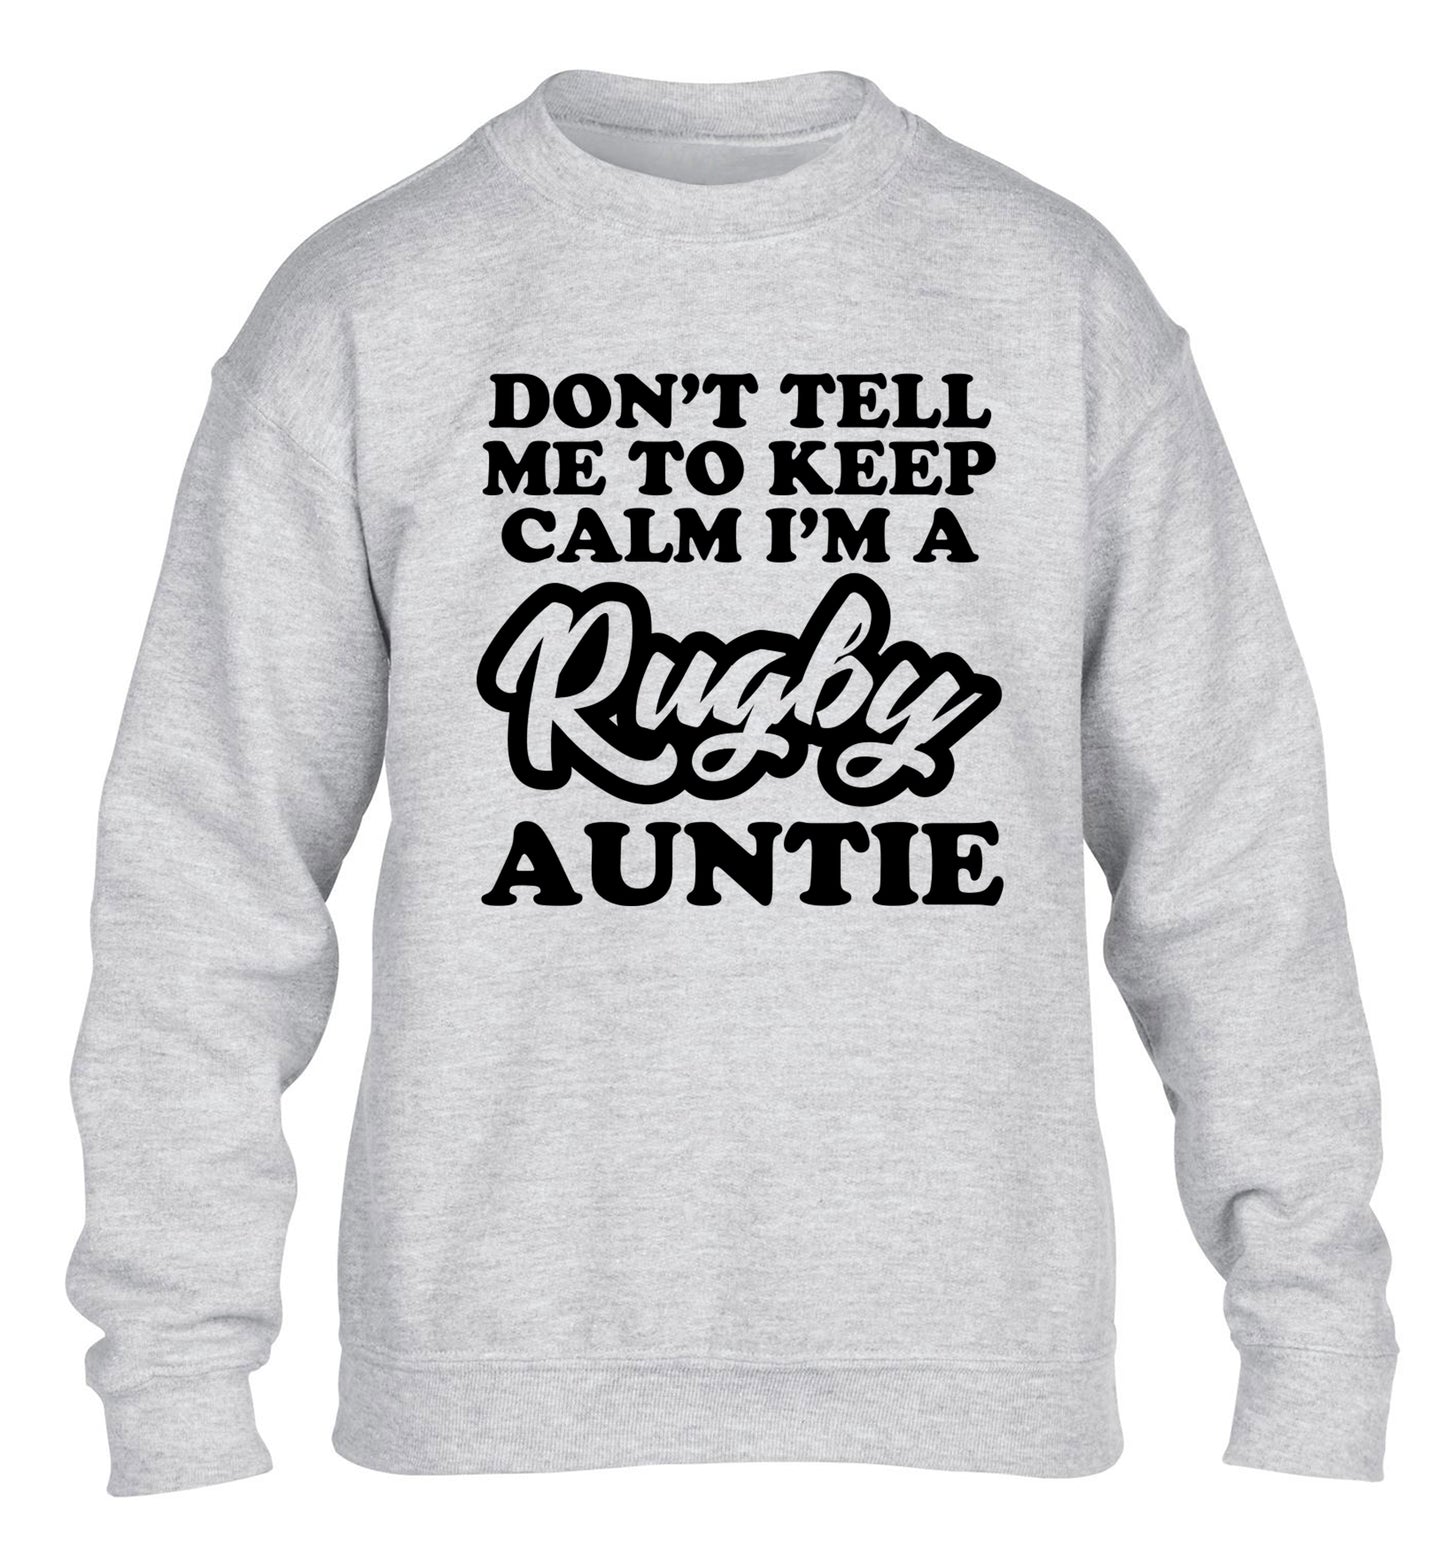 Don't tell me keep calm I'm a rugby auntie children's grey sweater 12-13 Years